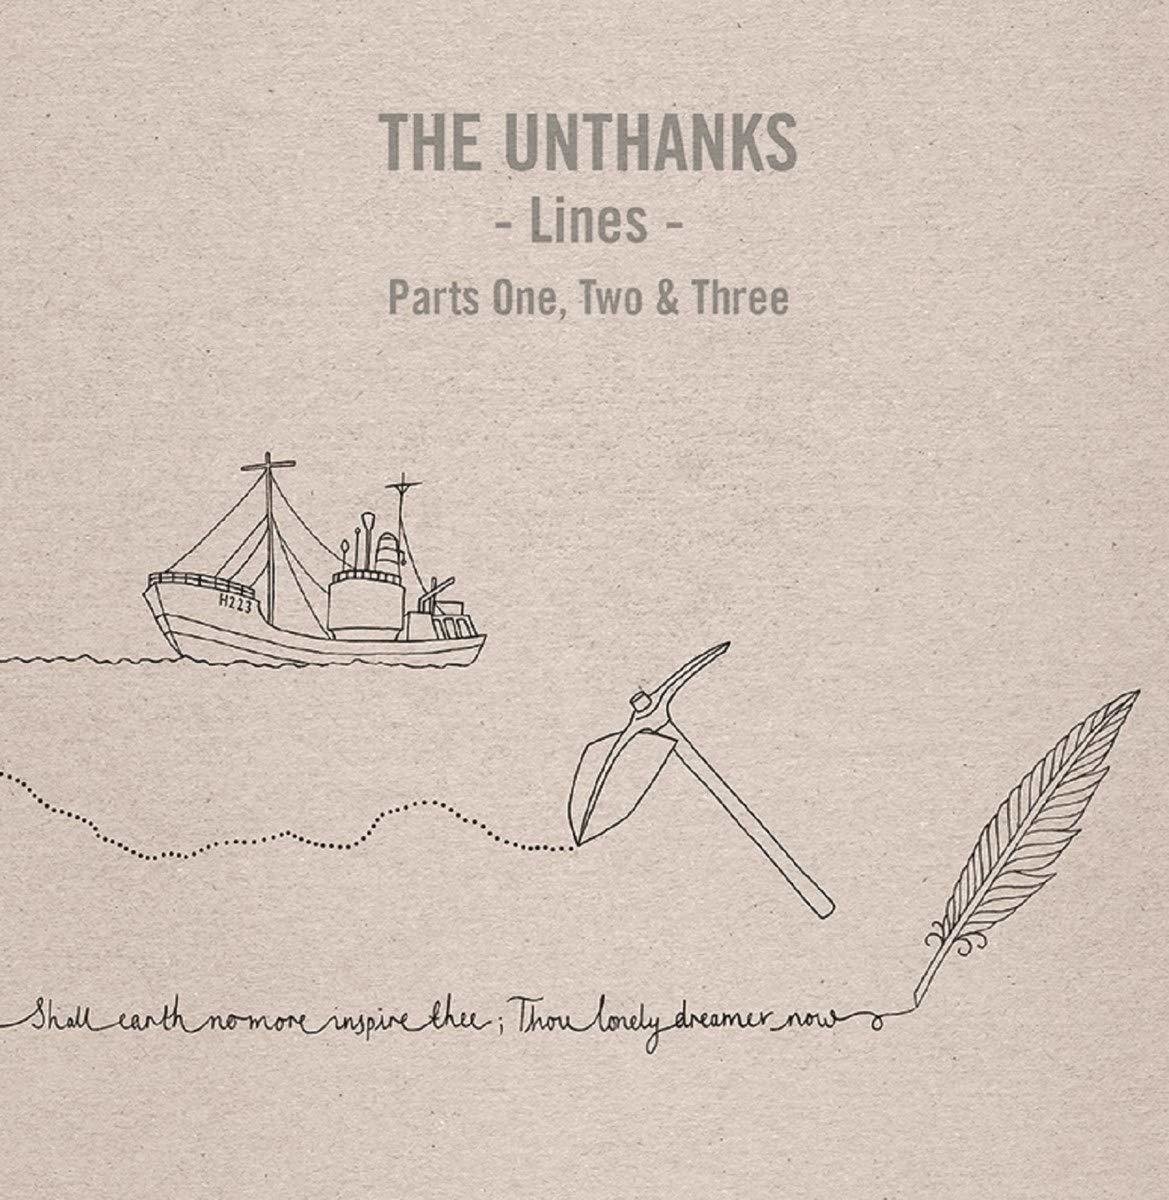 Disco de vinil The Unthanks - Lines - Parts One, Two And Three (3 x 10" Vinyl)